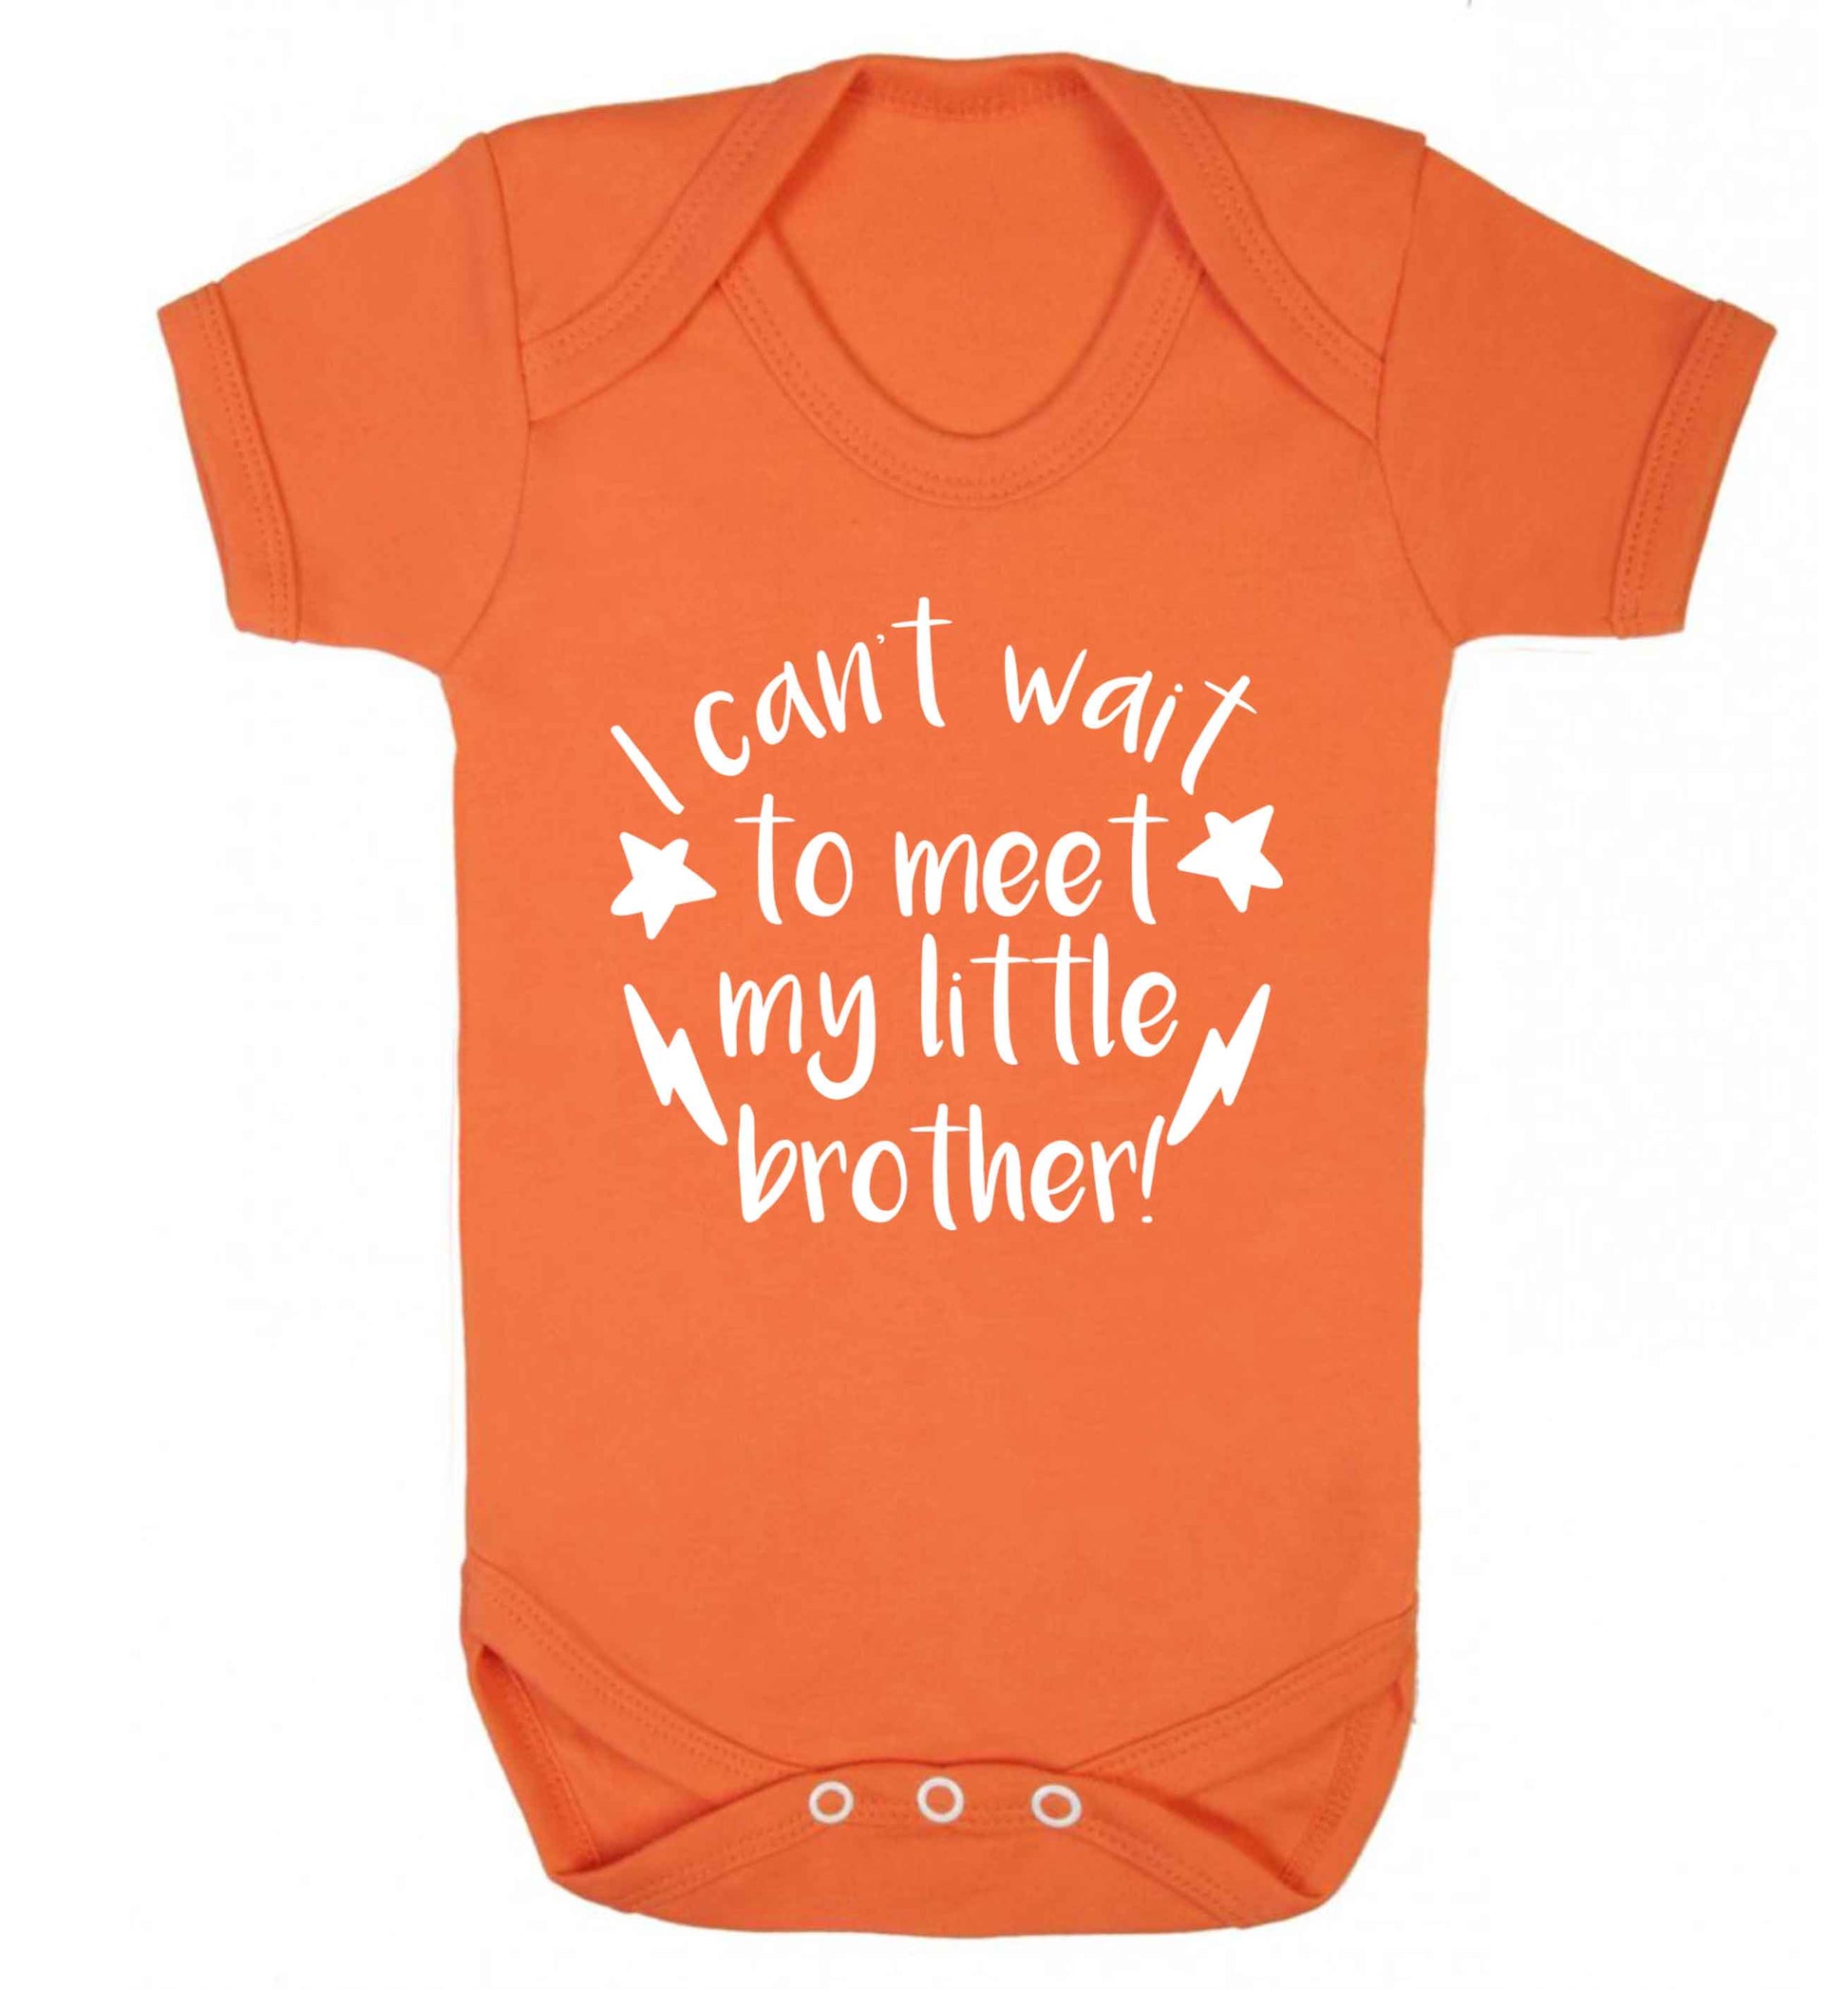 I can't wait to meet my sister! Baby Vest orange 18-24 months